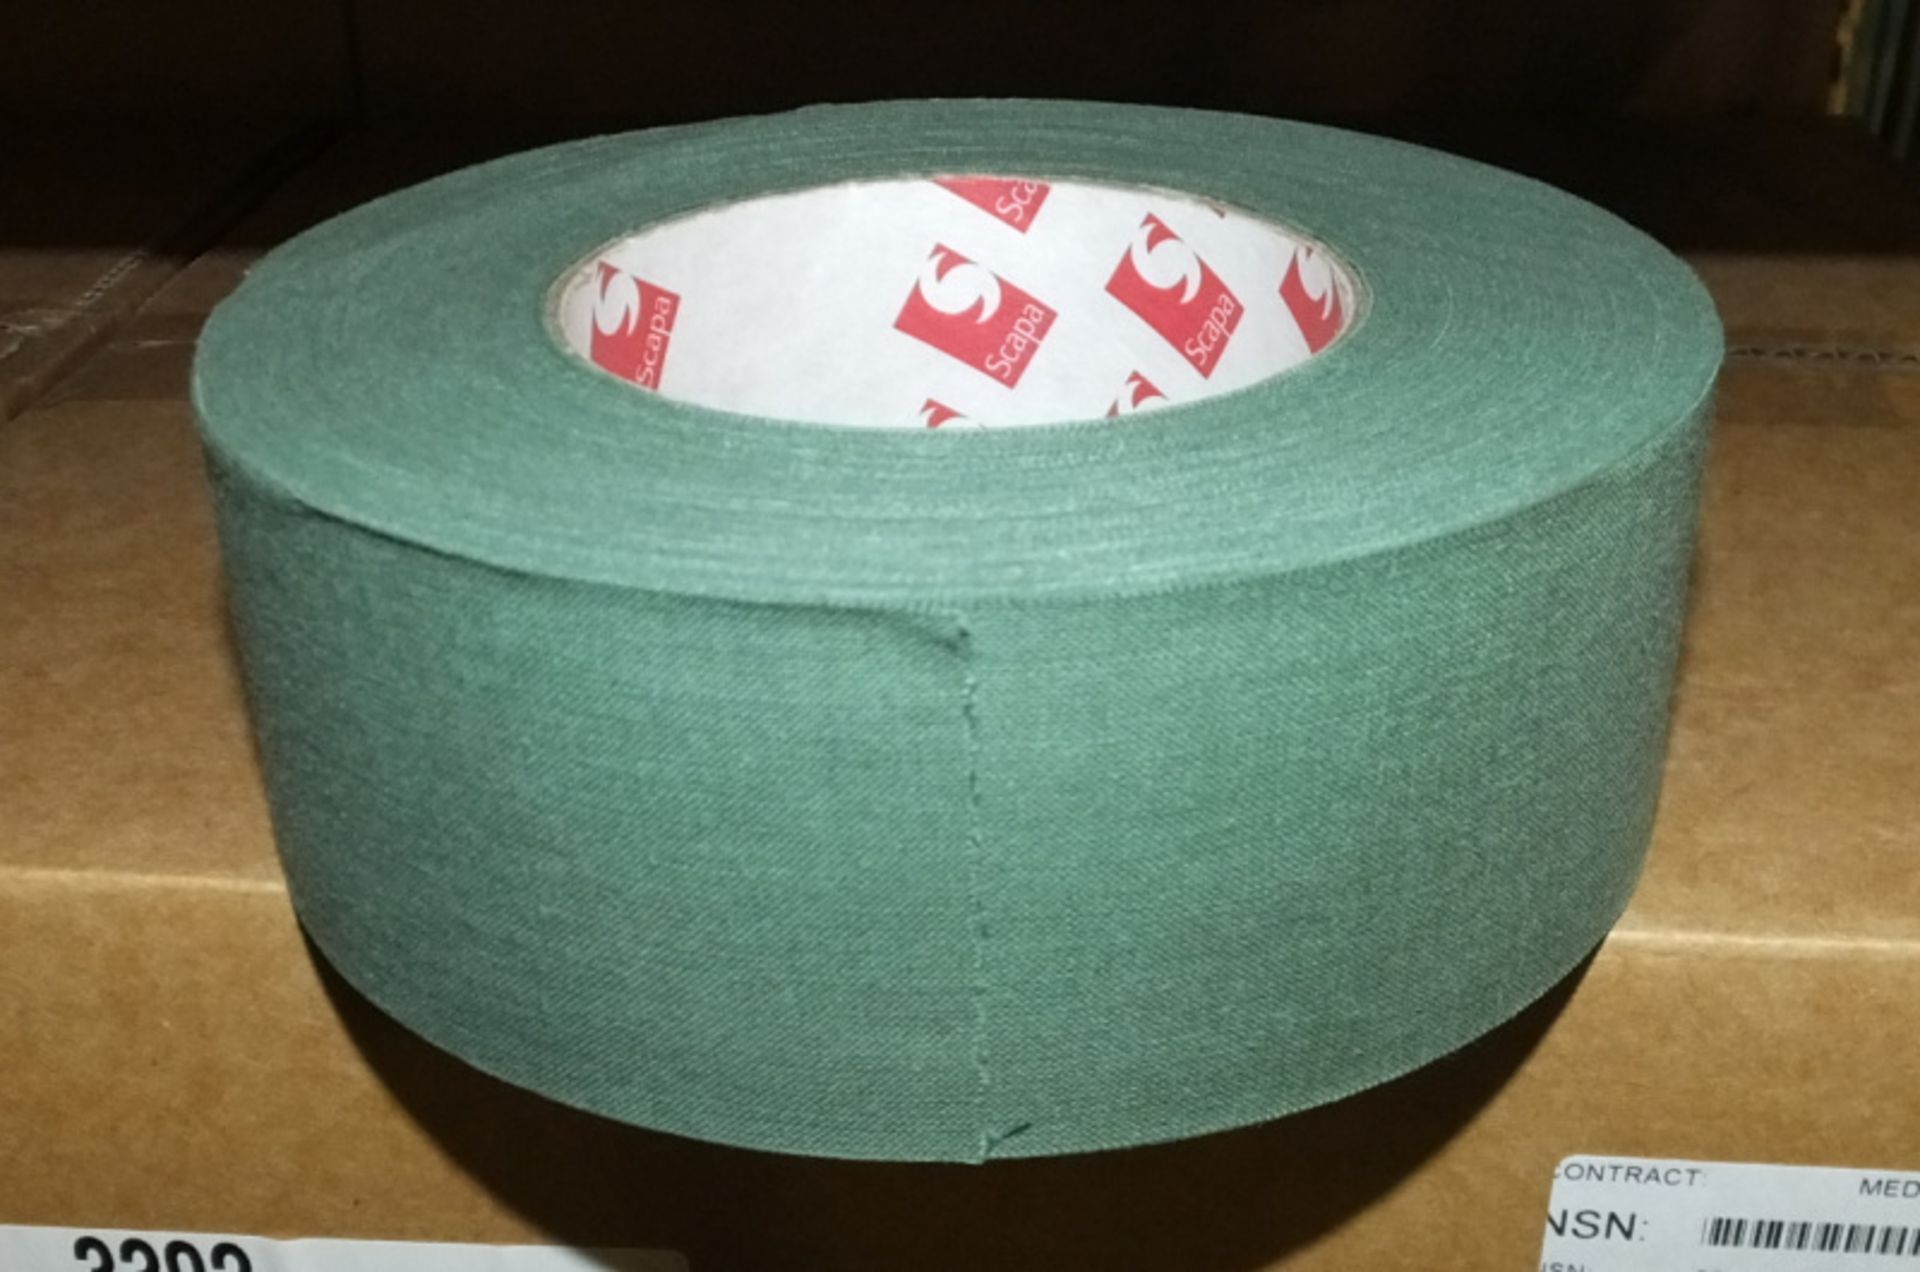 Scapa Tape 3302 - Olive Green - 50mm x 50M - 16 rolls per box - 2 boxes - Image 2 of 3